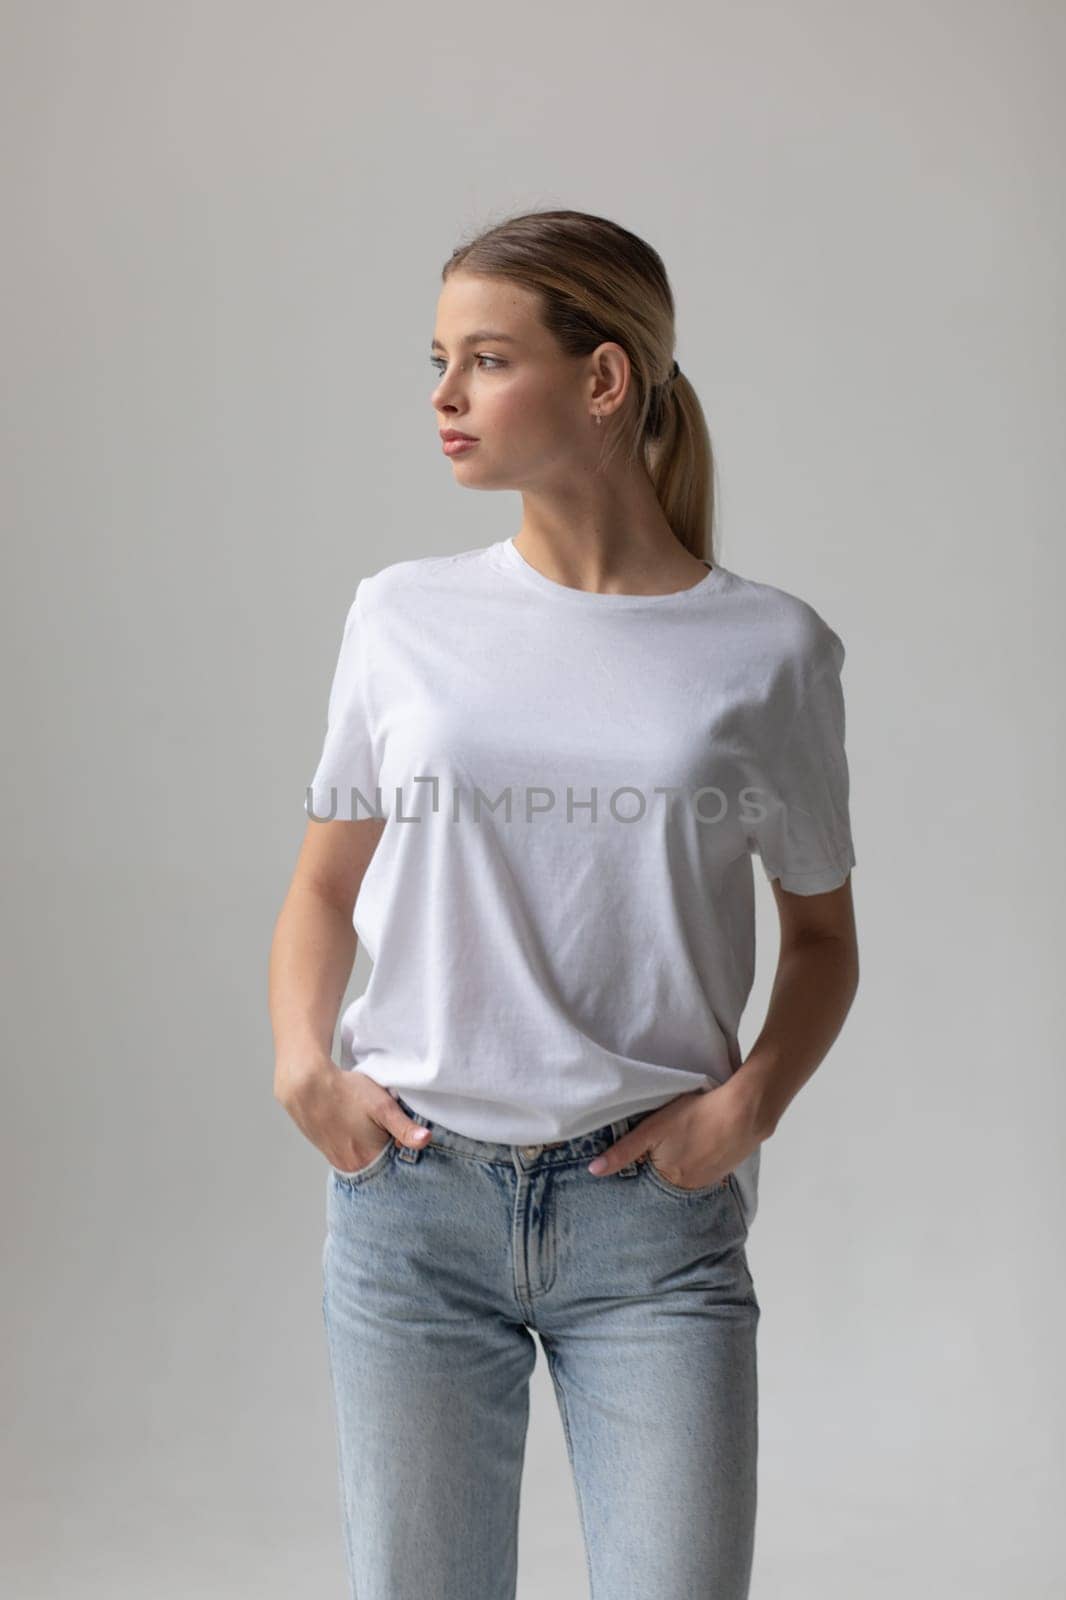 Beautiful blonde woman in a white T-shirt and blue jeans posing on a white background by Freeman_Studio